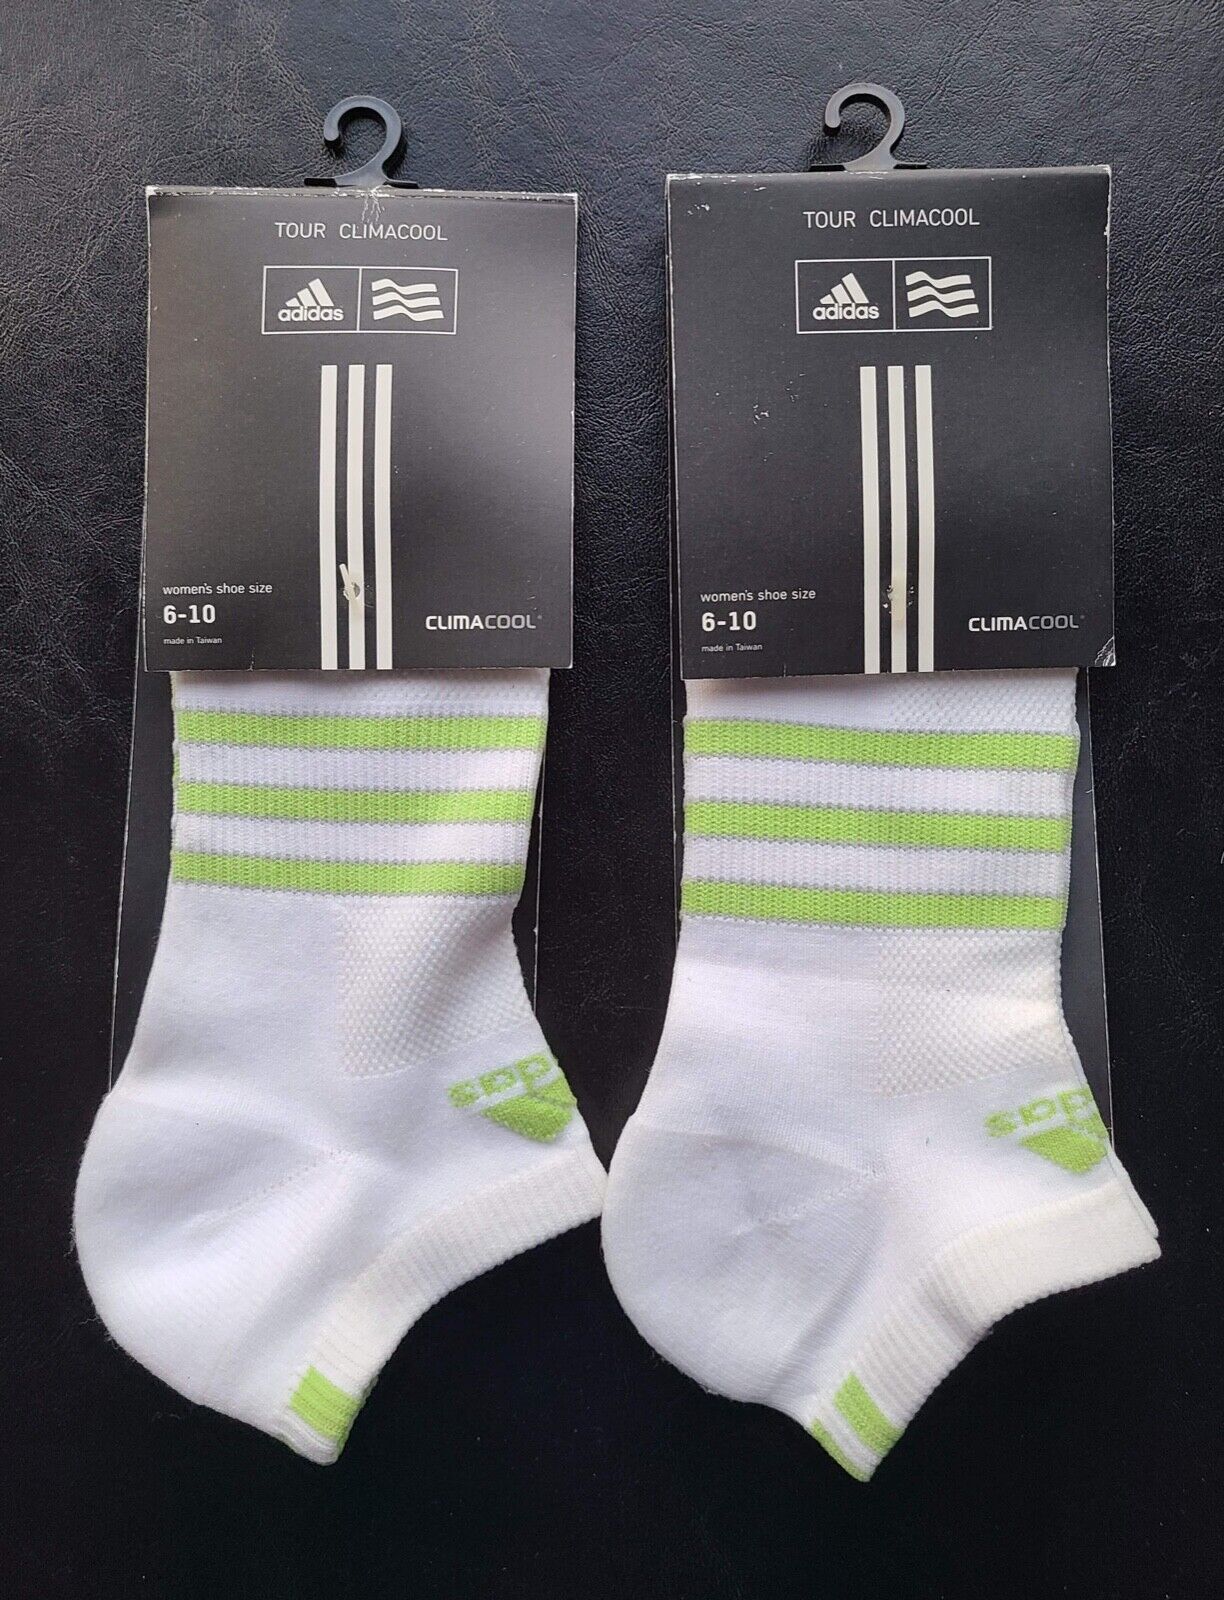 2 Pair New Women's Adidas Tour Climacool Socks, Size: 6-10, Color:white/green-a6